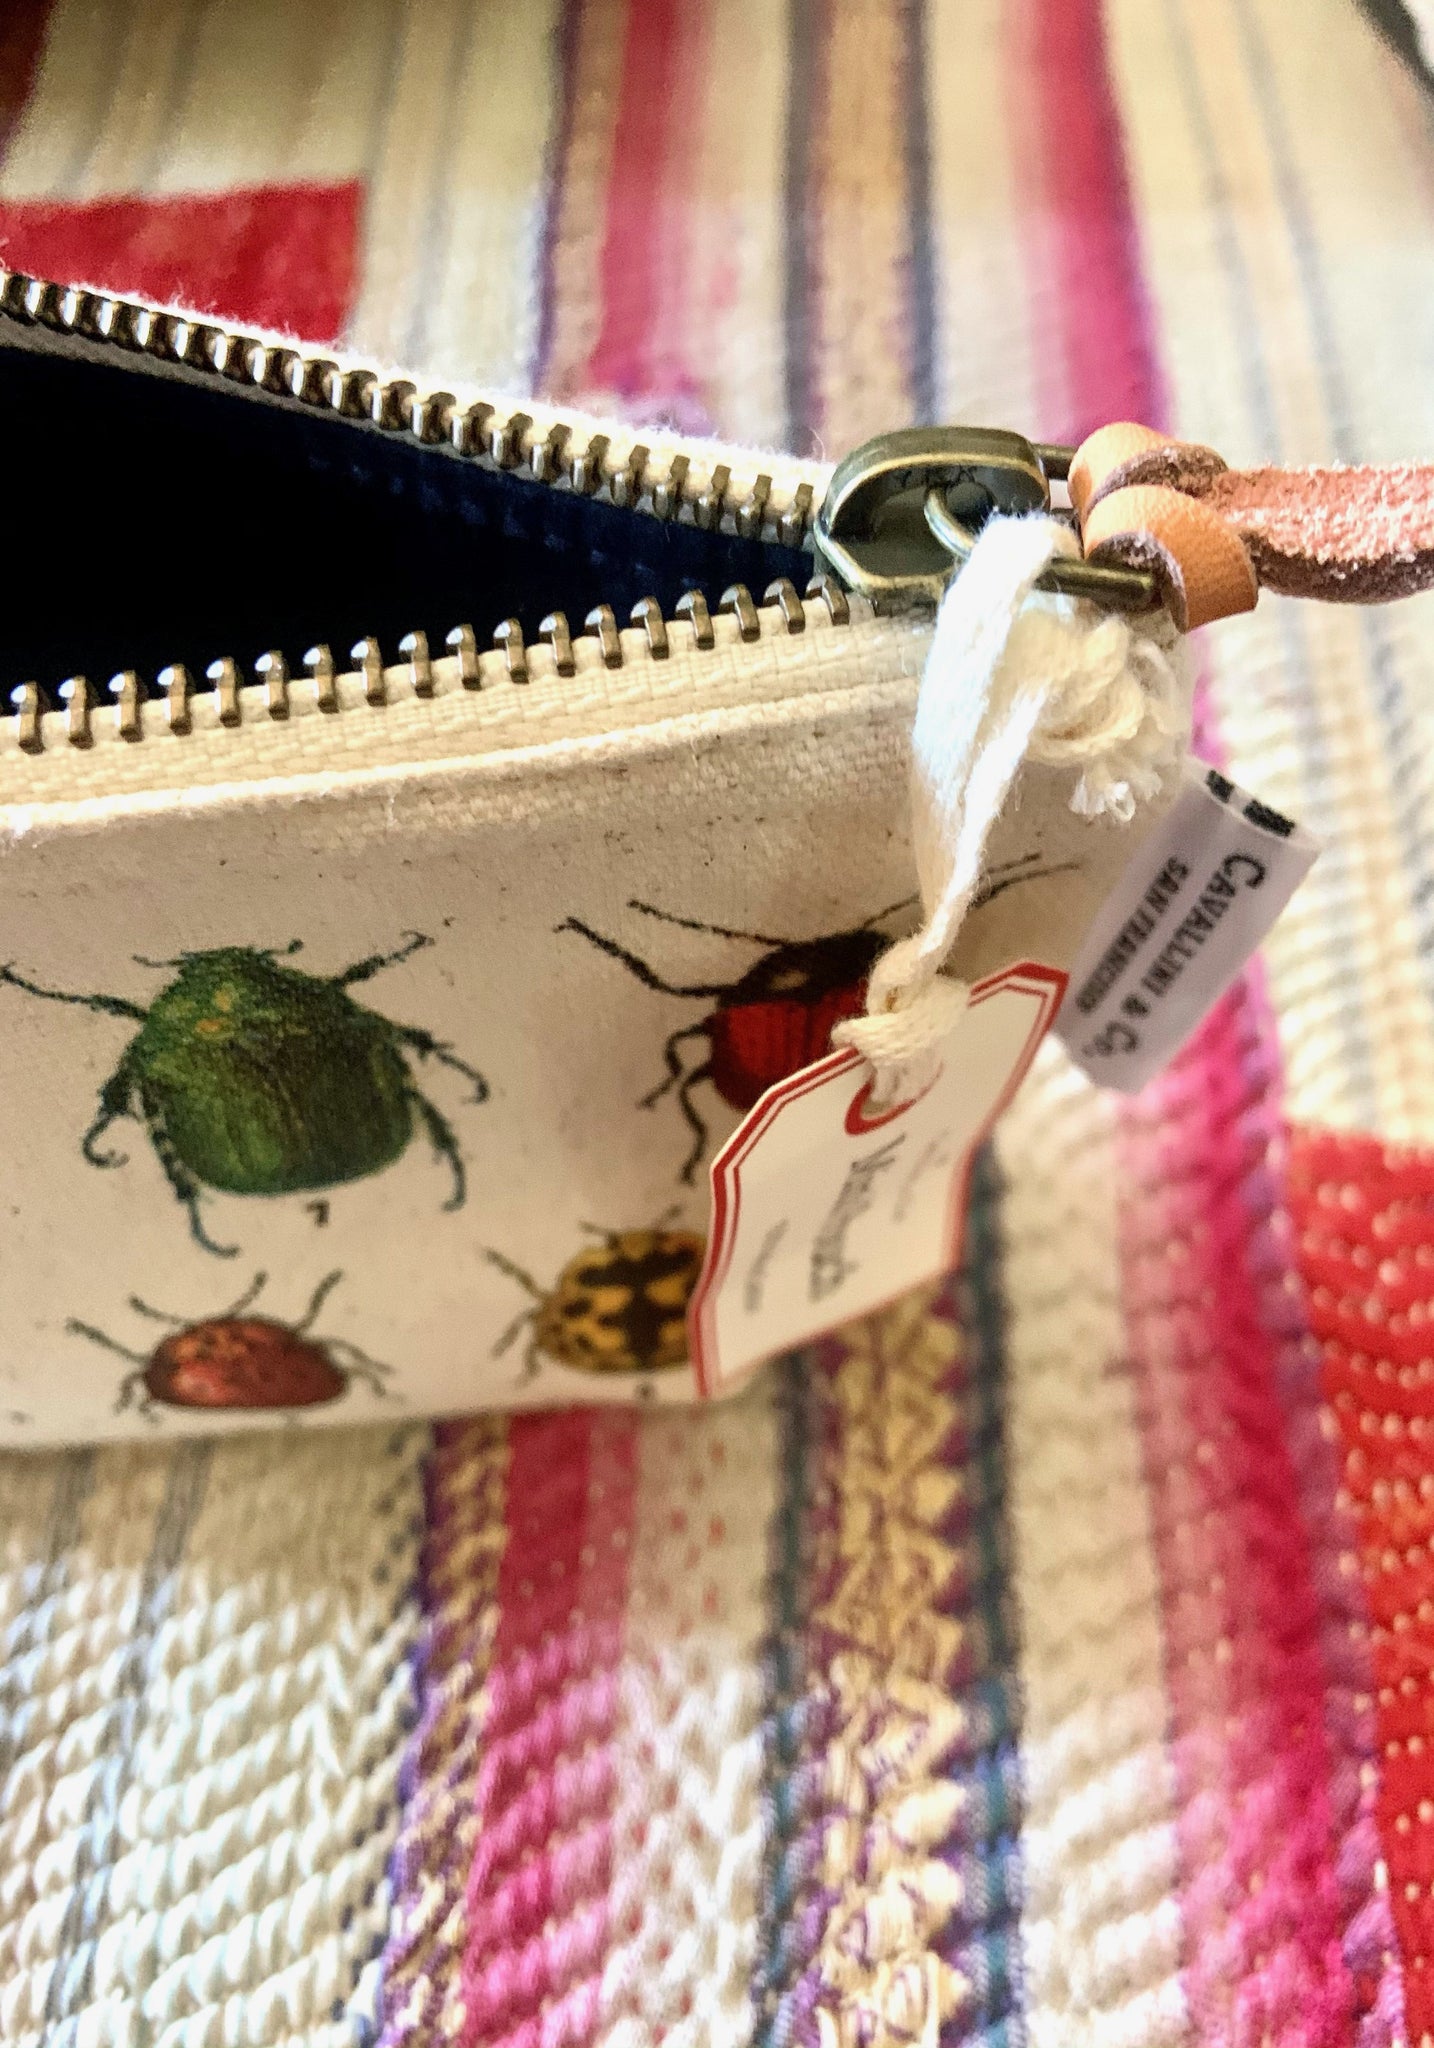 Insect Pencil Pouch